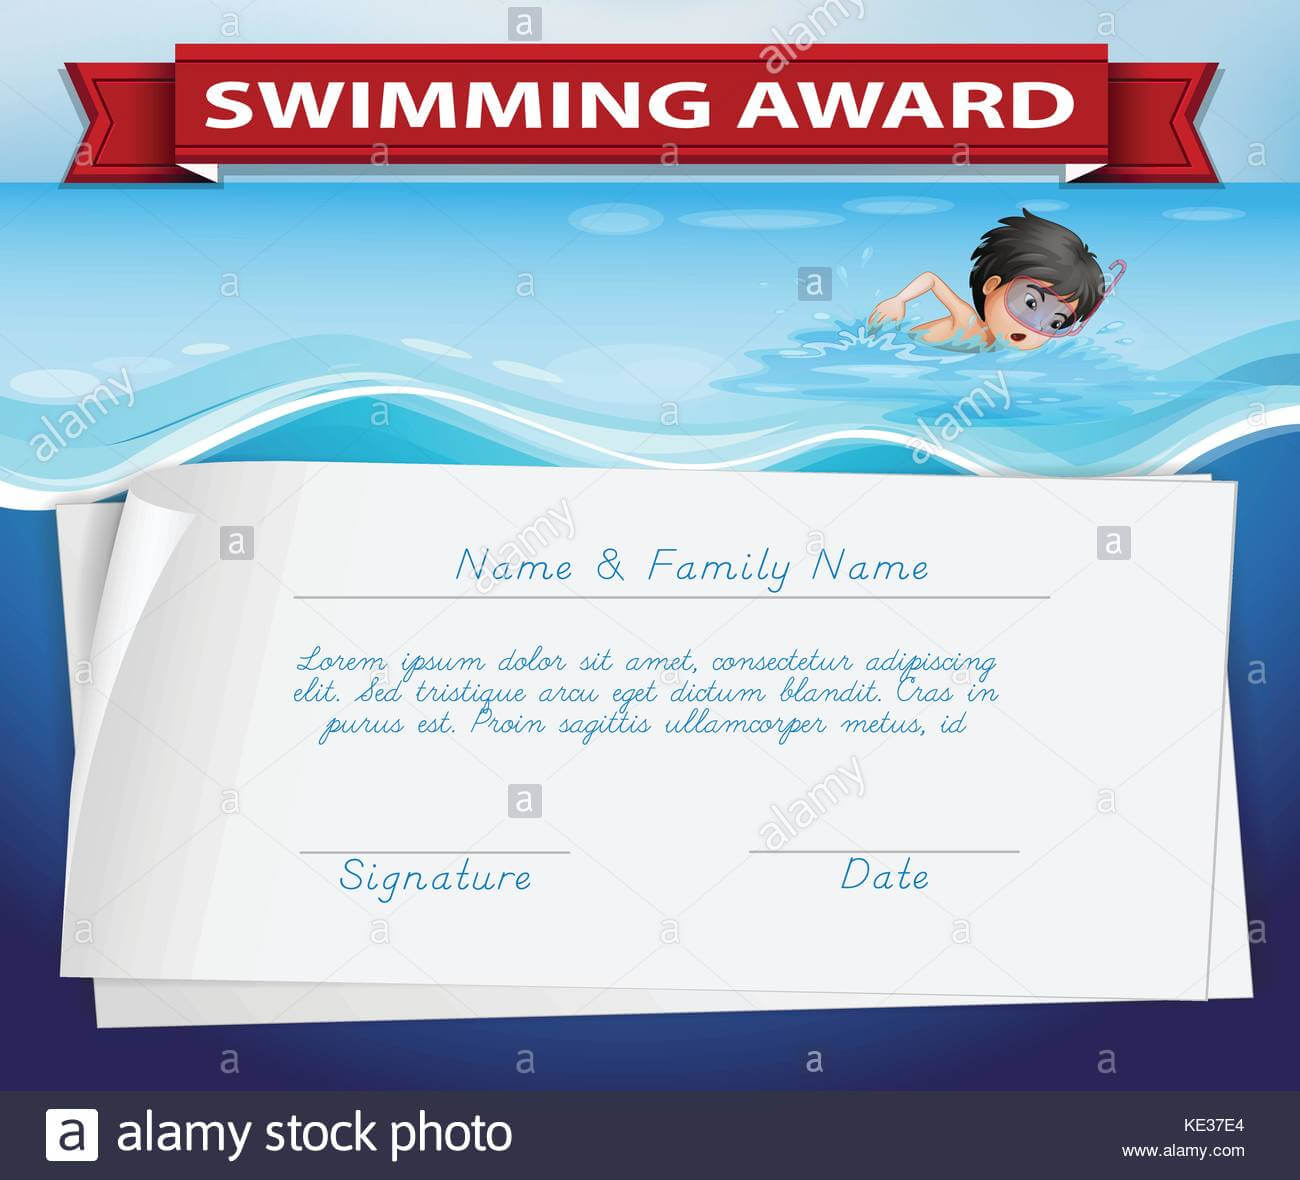 Template Of Certificate For Swimming Award Illustration With Swimming Award Certificate Template